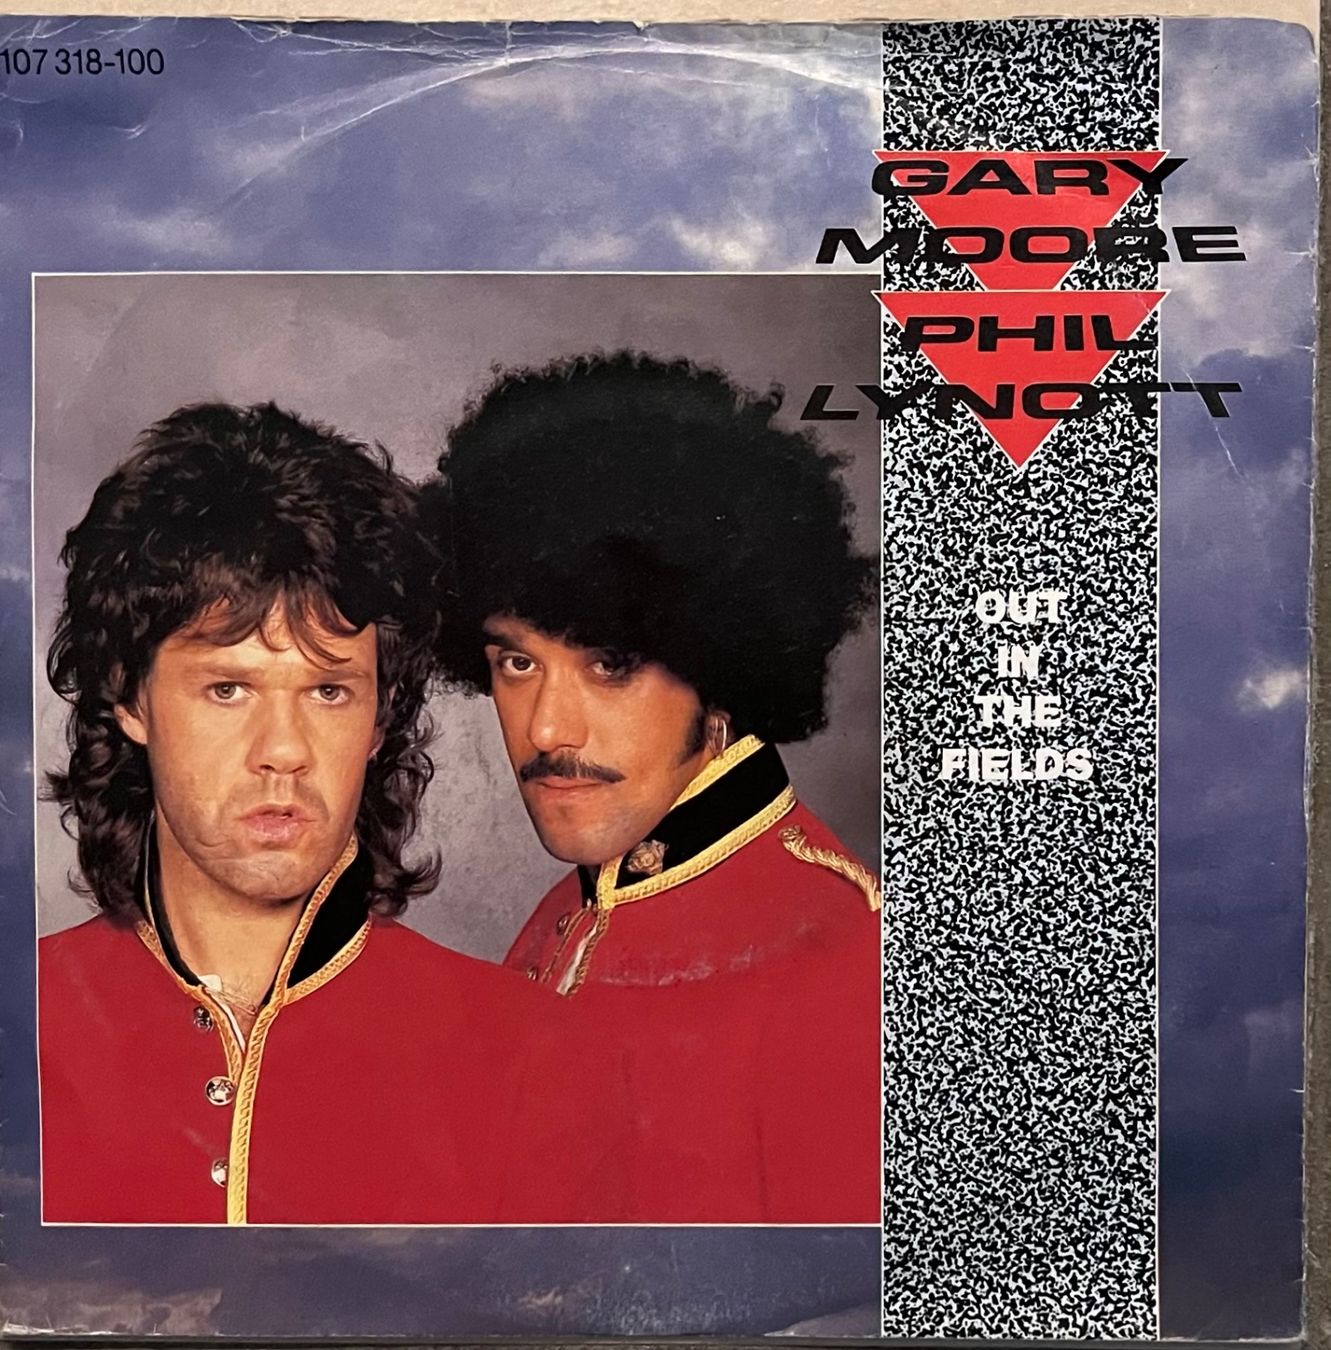 gary-moore-phil-lynott-out-in-the-fields